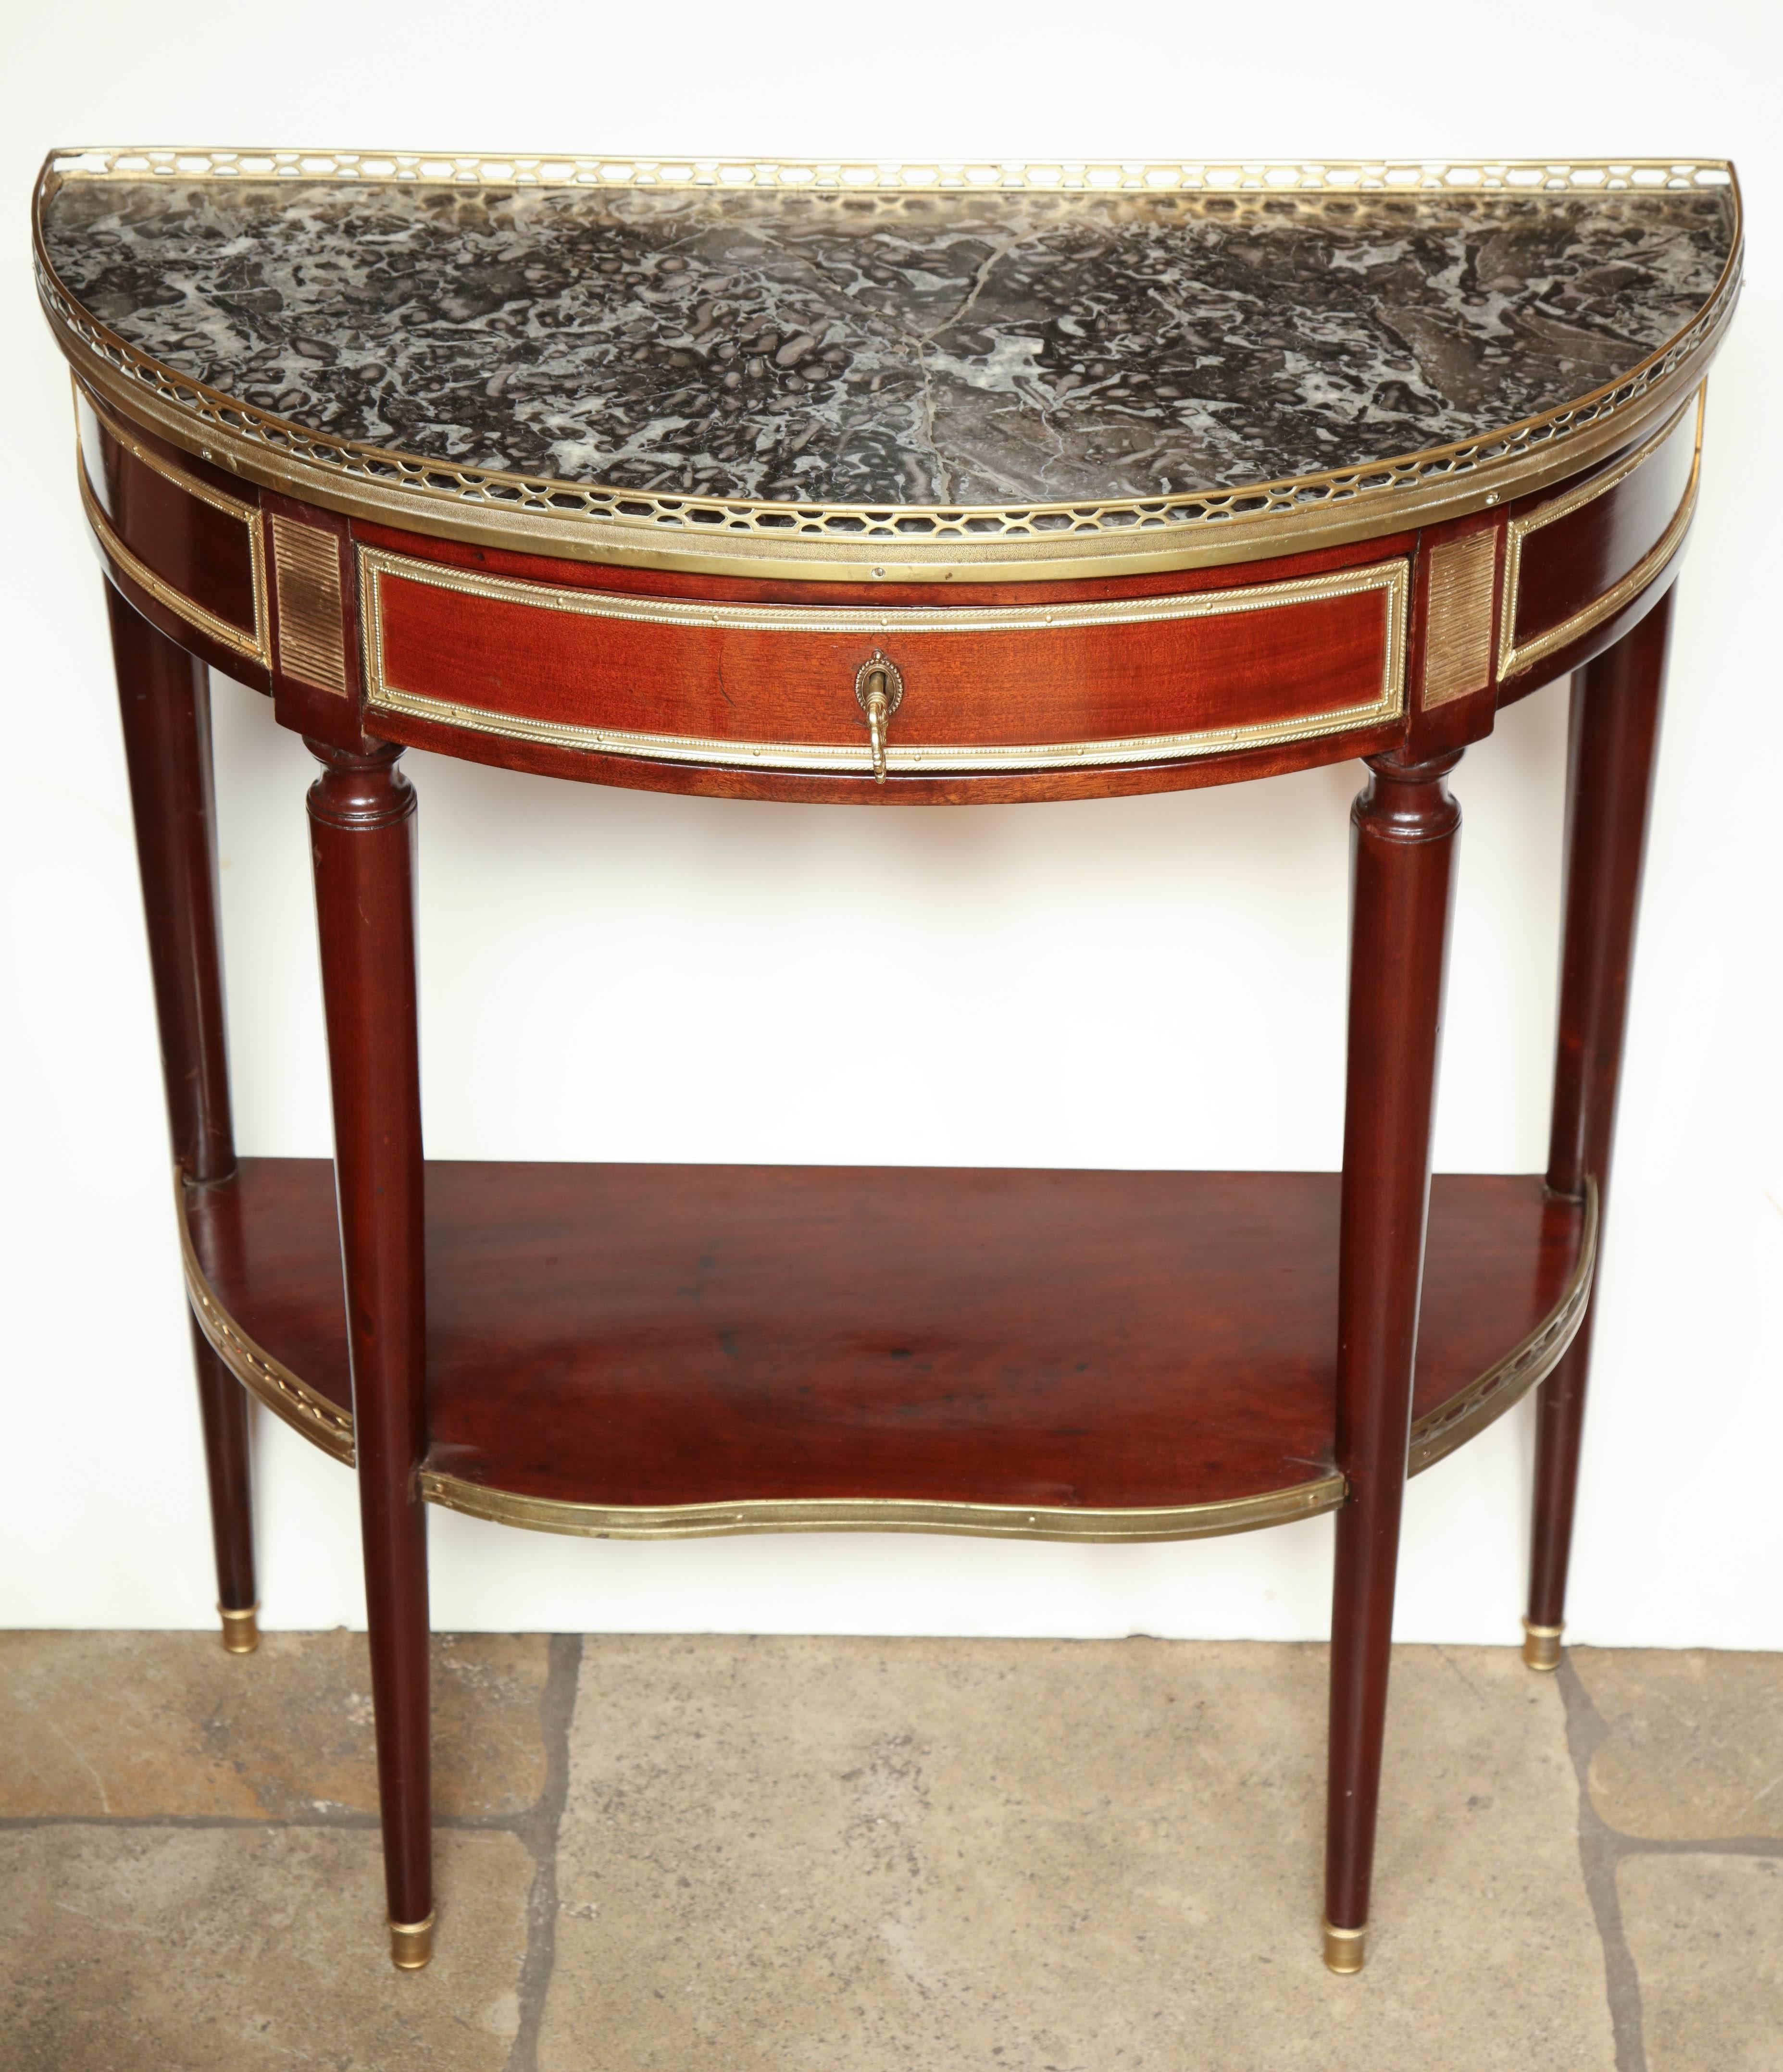 French Louis XVI marble-top mahogany demilune console table. With a pierced bronze gallery, brass mounts and trim, turned and tapered legs and a shelf stretcher base.
Stamped 